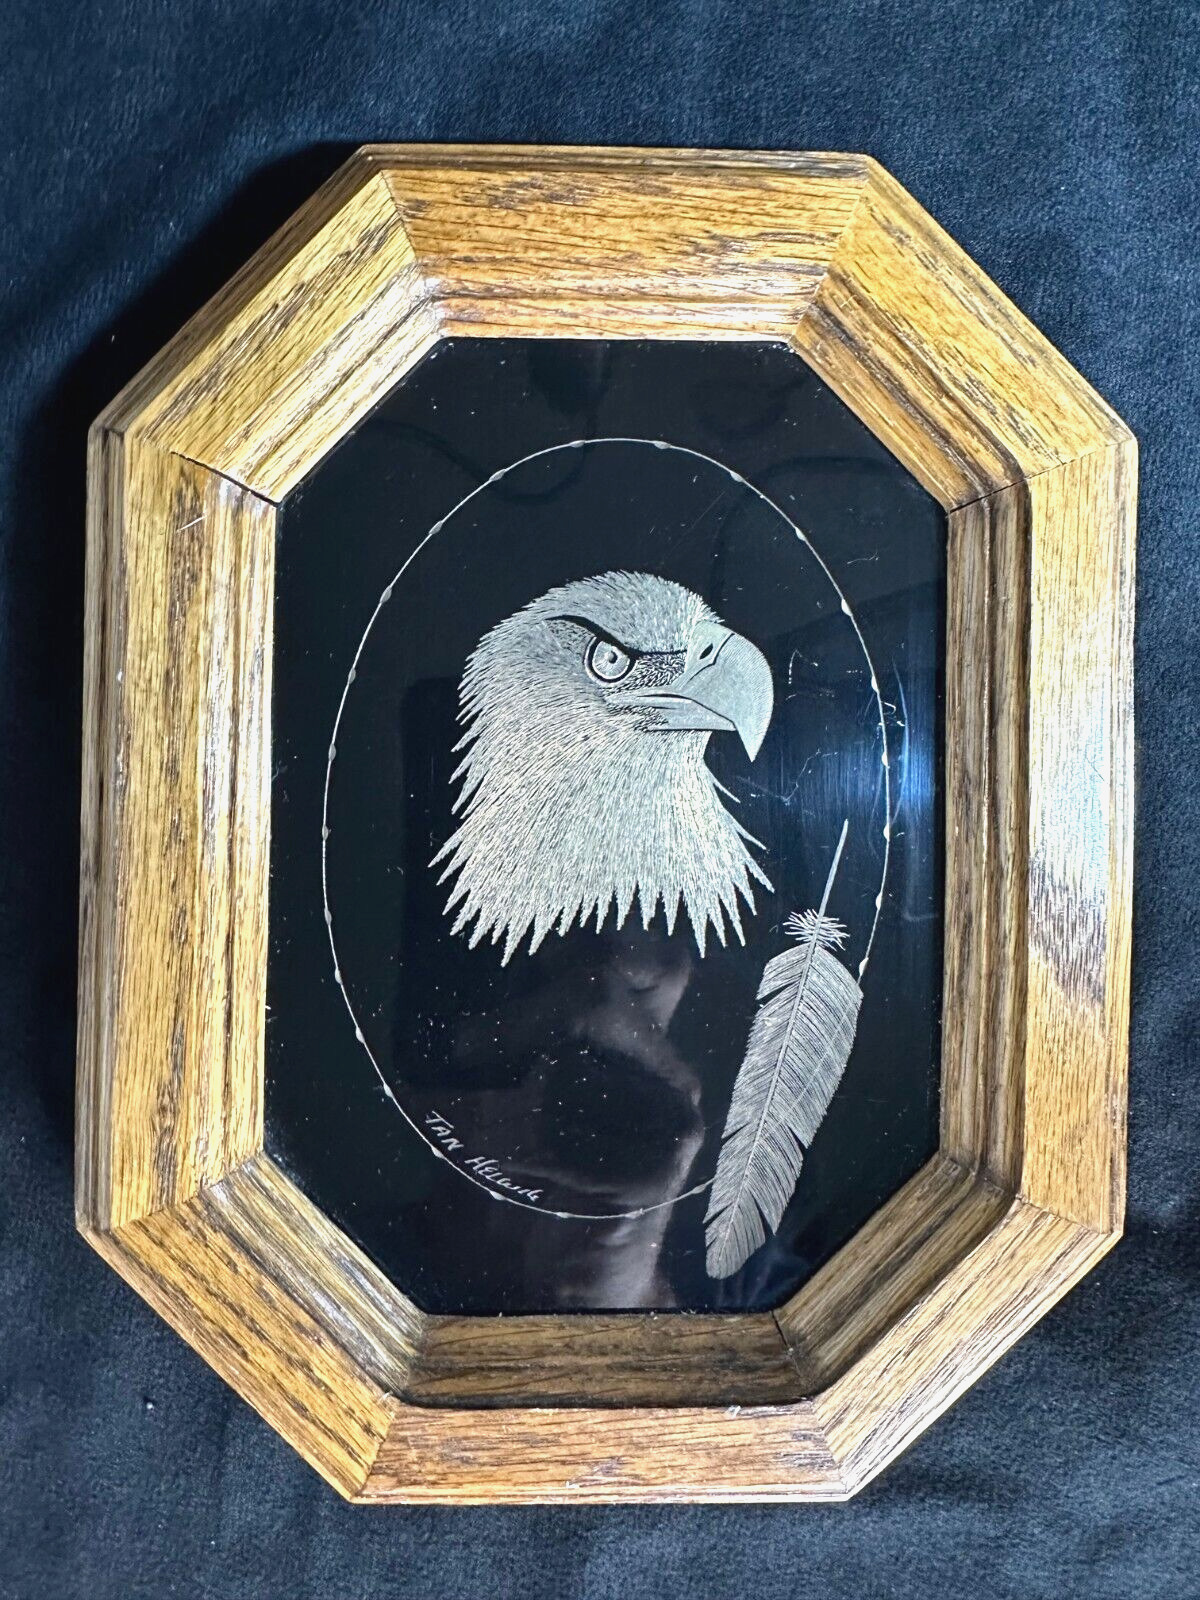 Handcrafted Golden Images Etched Baked Enamel Brass Eagle Head and Feather